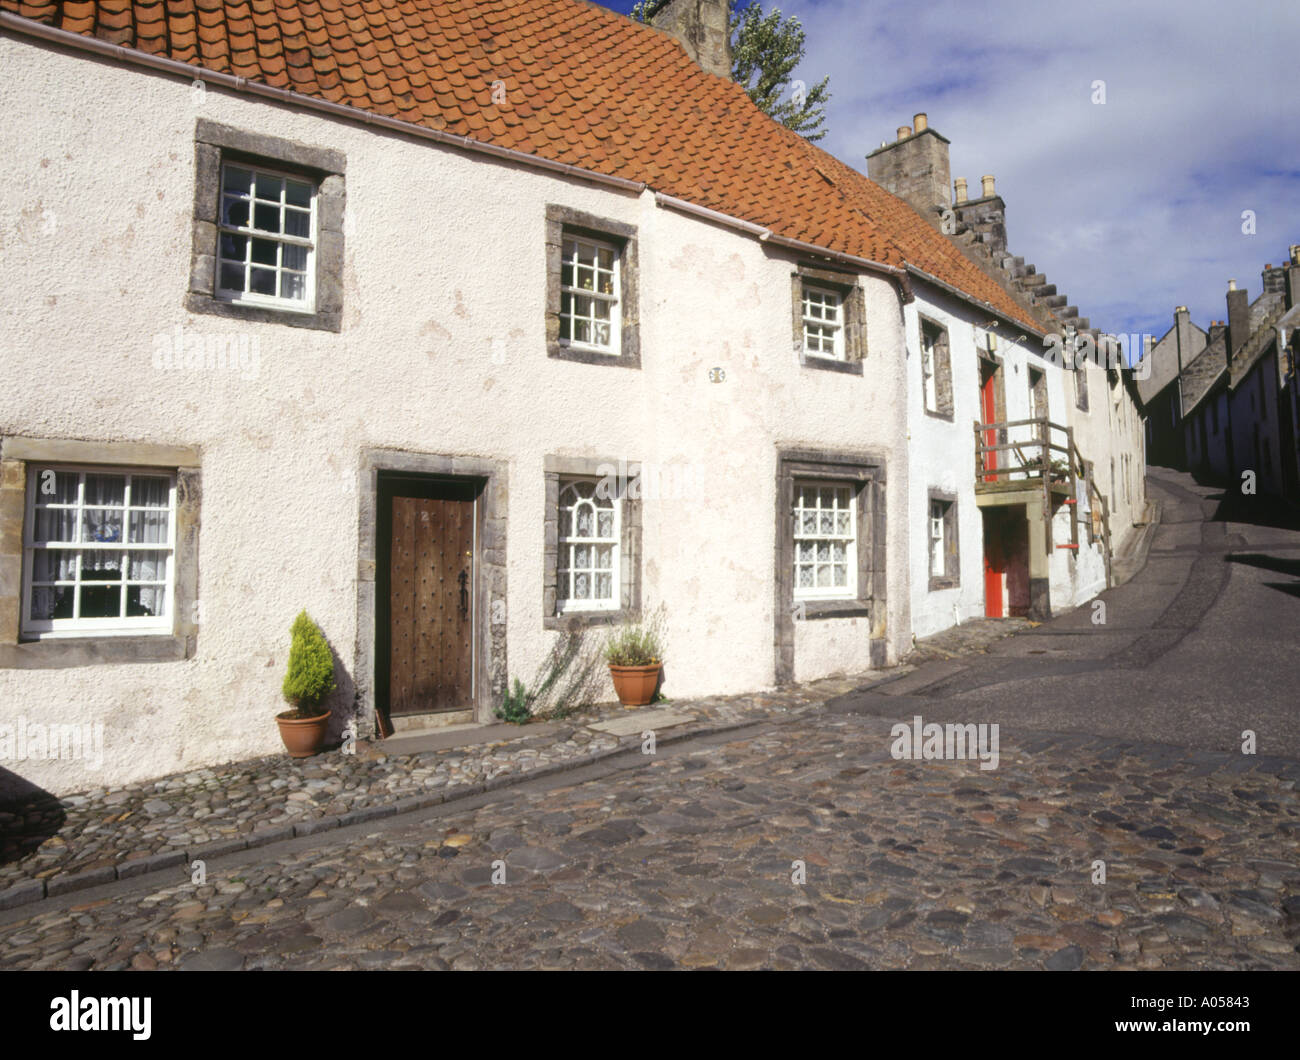 dh  CULROSS FIFE Whitewashed houses and cobble street 17th century pantiled building Stock Photo